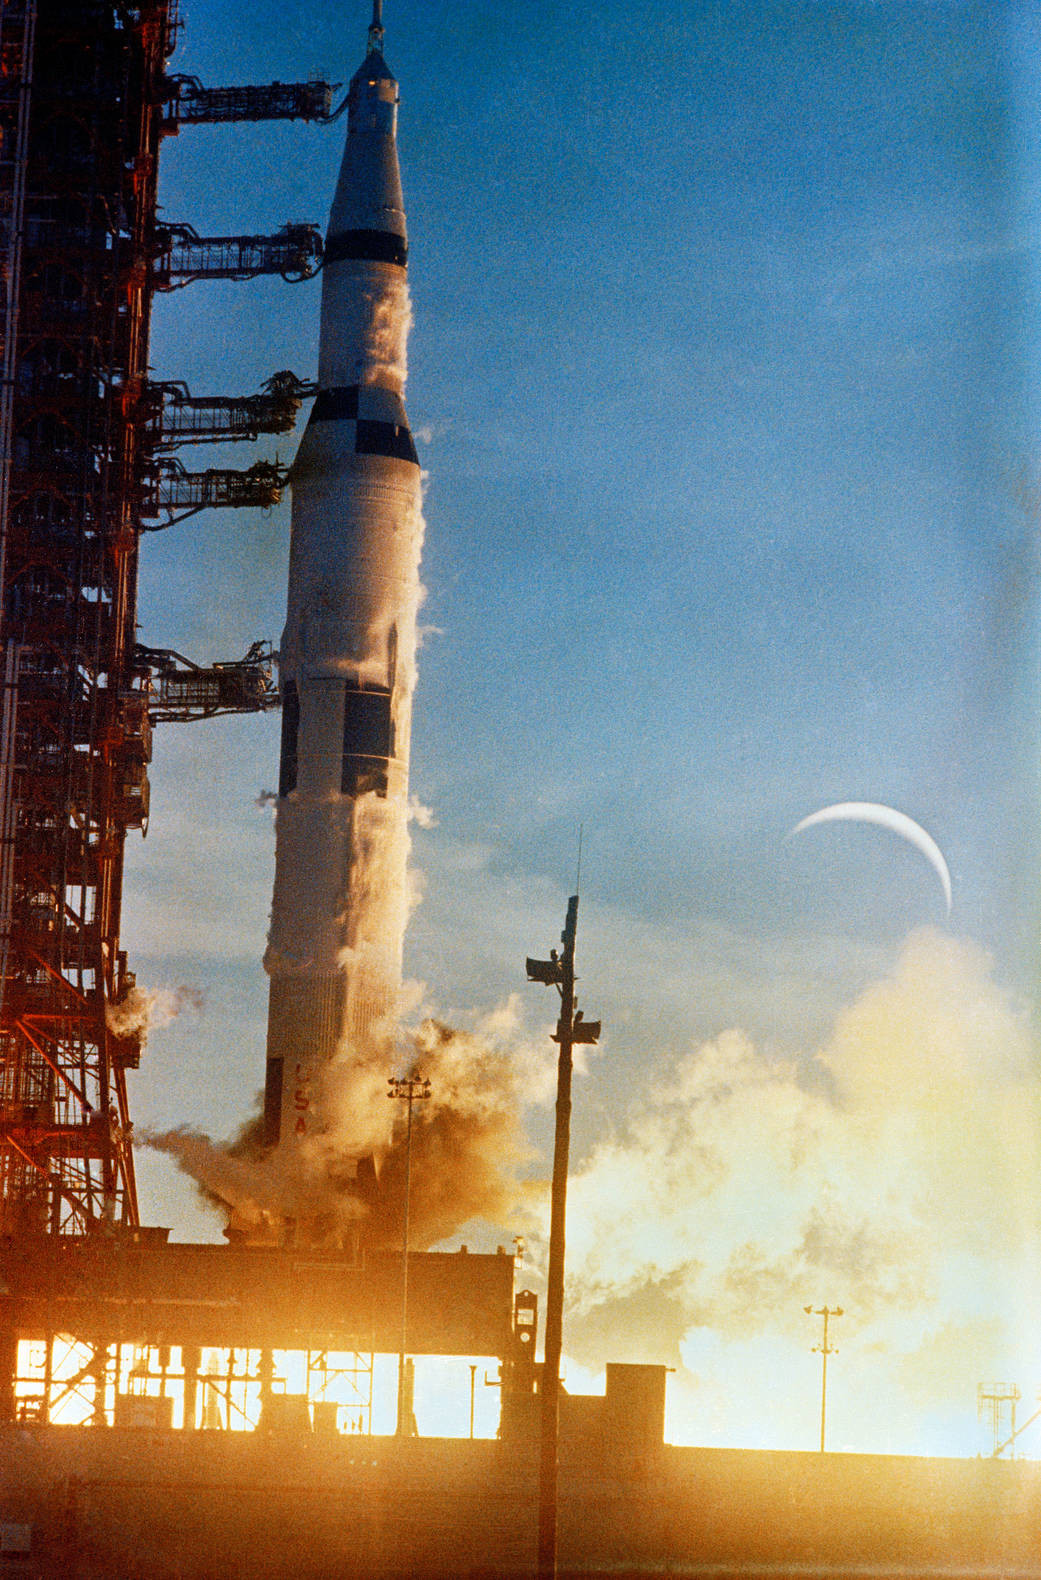 This week in 1968, Apollo 8 lifted off from Launch Complex 39A at NASA’s Kennedy Space Center. 